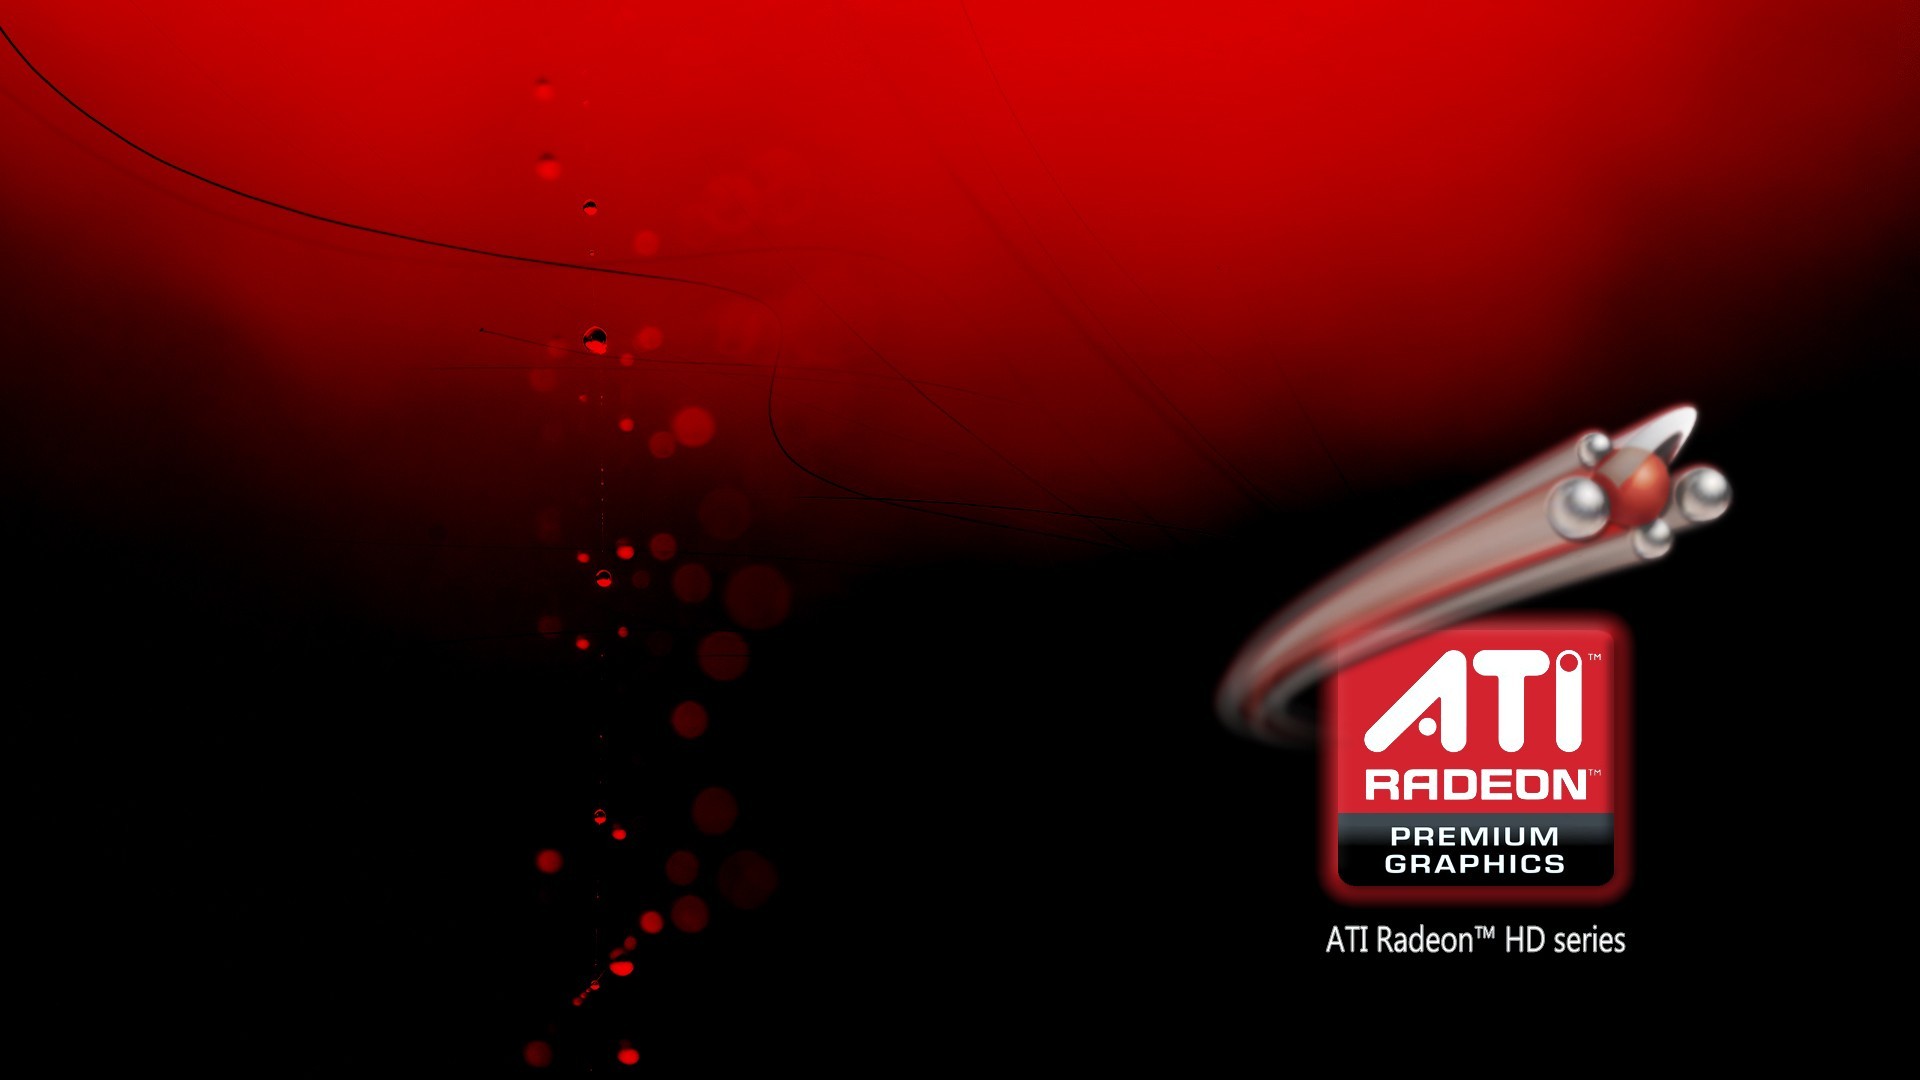 Wallpaper Ati Amd Pictures Wallpaperon Image Background Skin Red